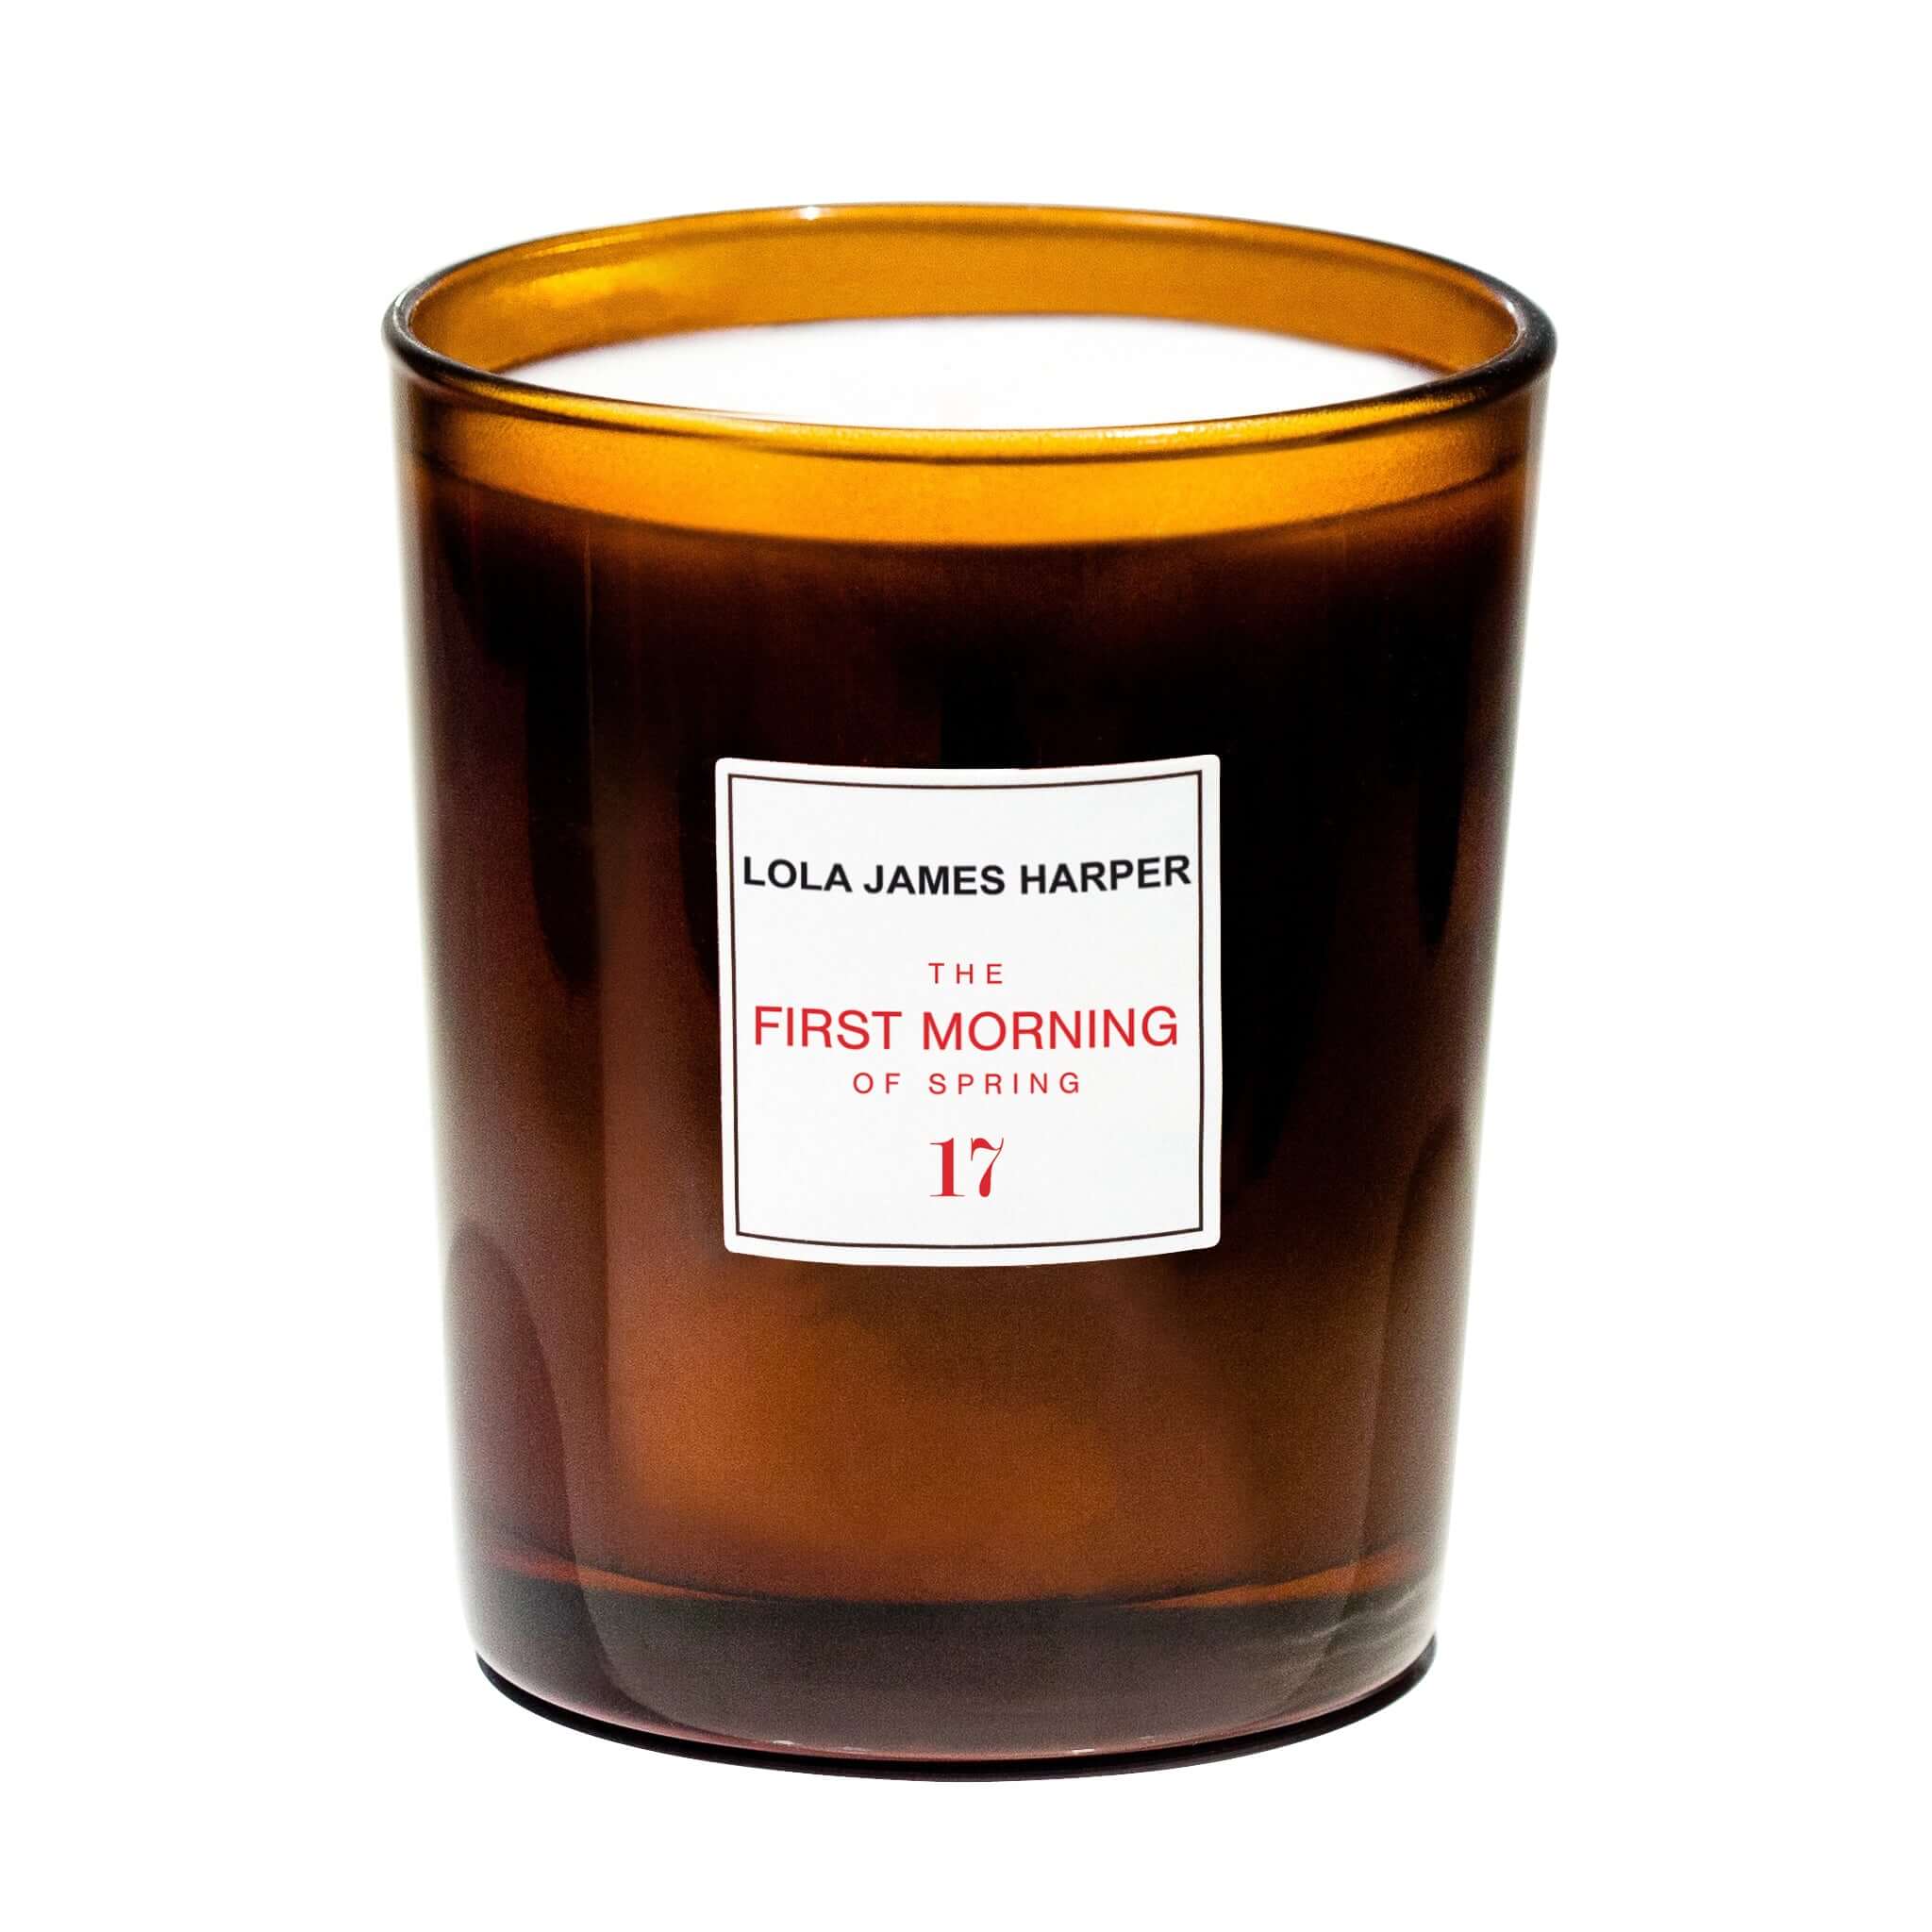 17 The First Morning of Spring Candle LOLA JAMES HARPER